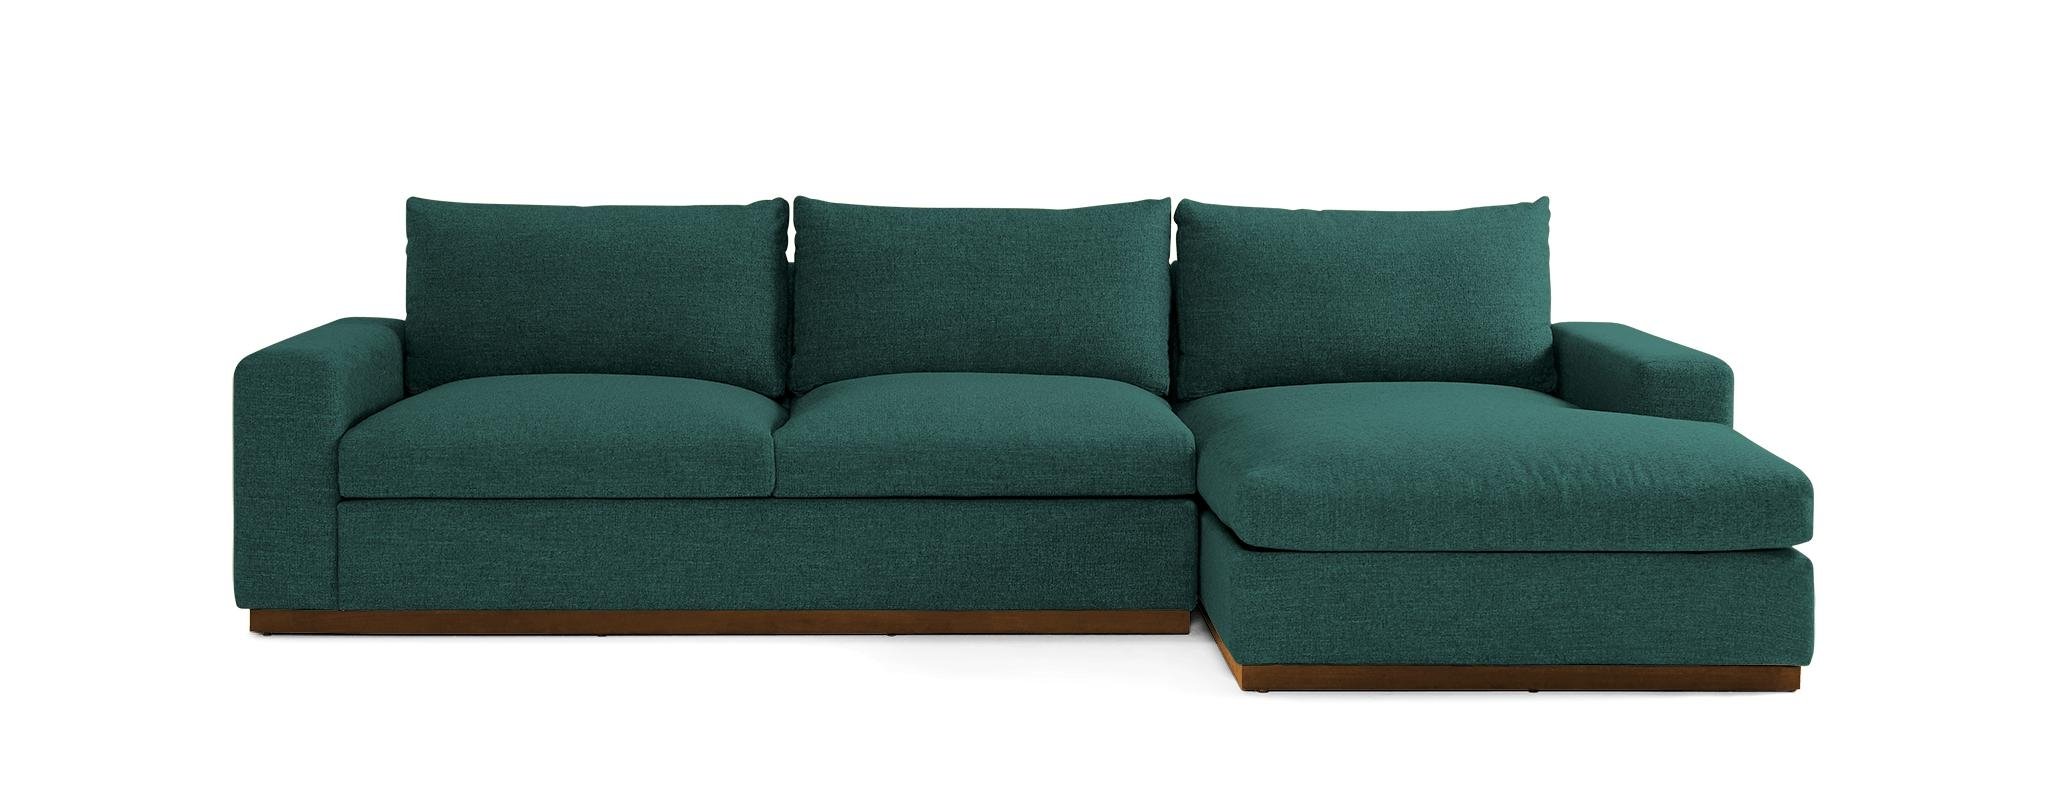 Blue Holt Mid Century Modern Sectional with Storage - Prime Peacock - Mocha - Right - Image 0